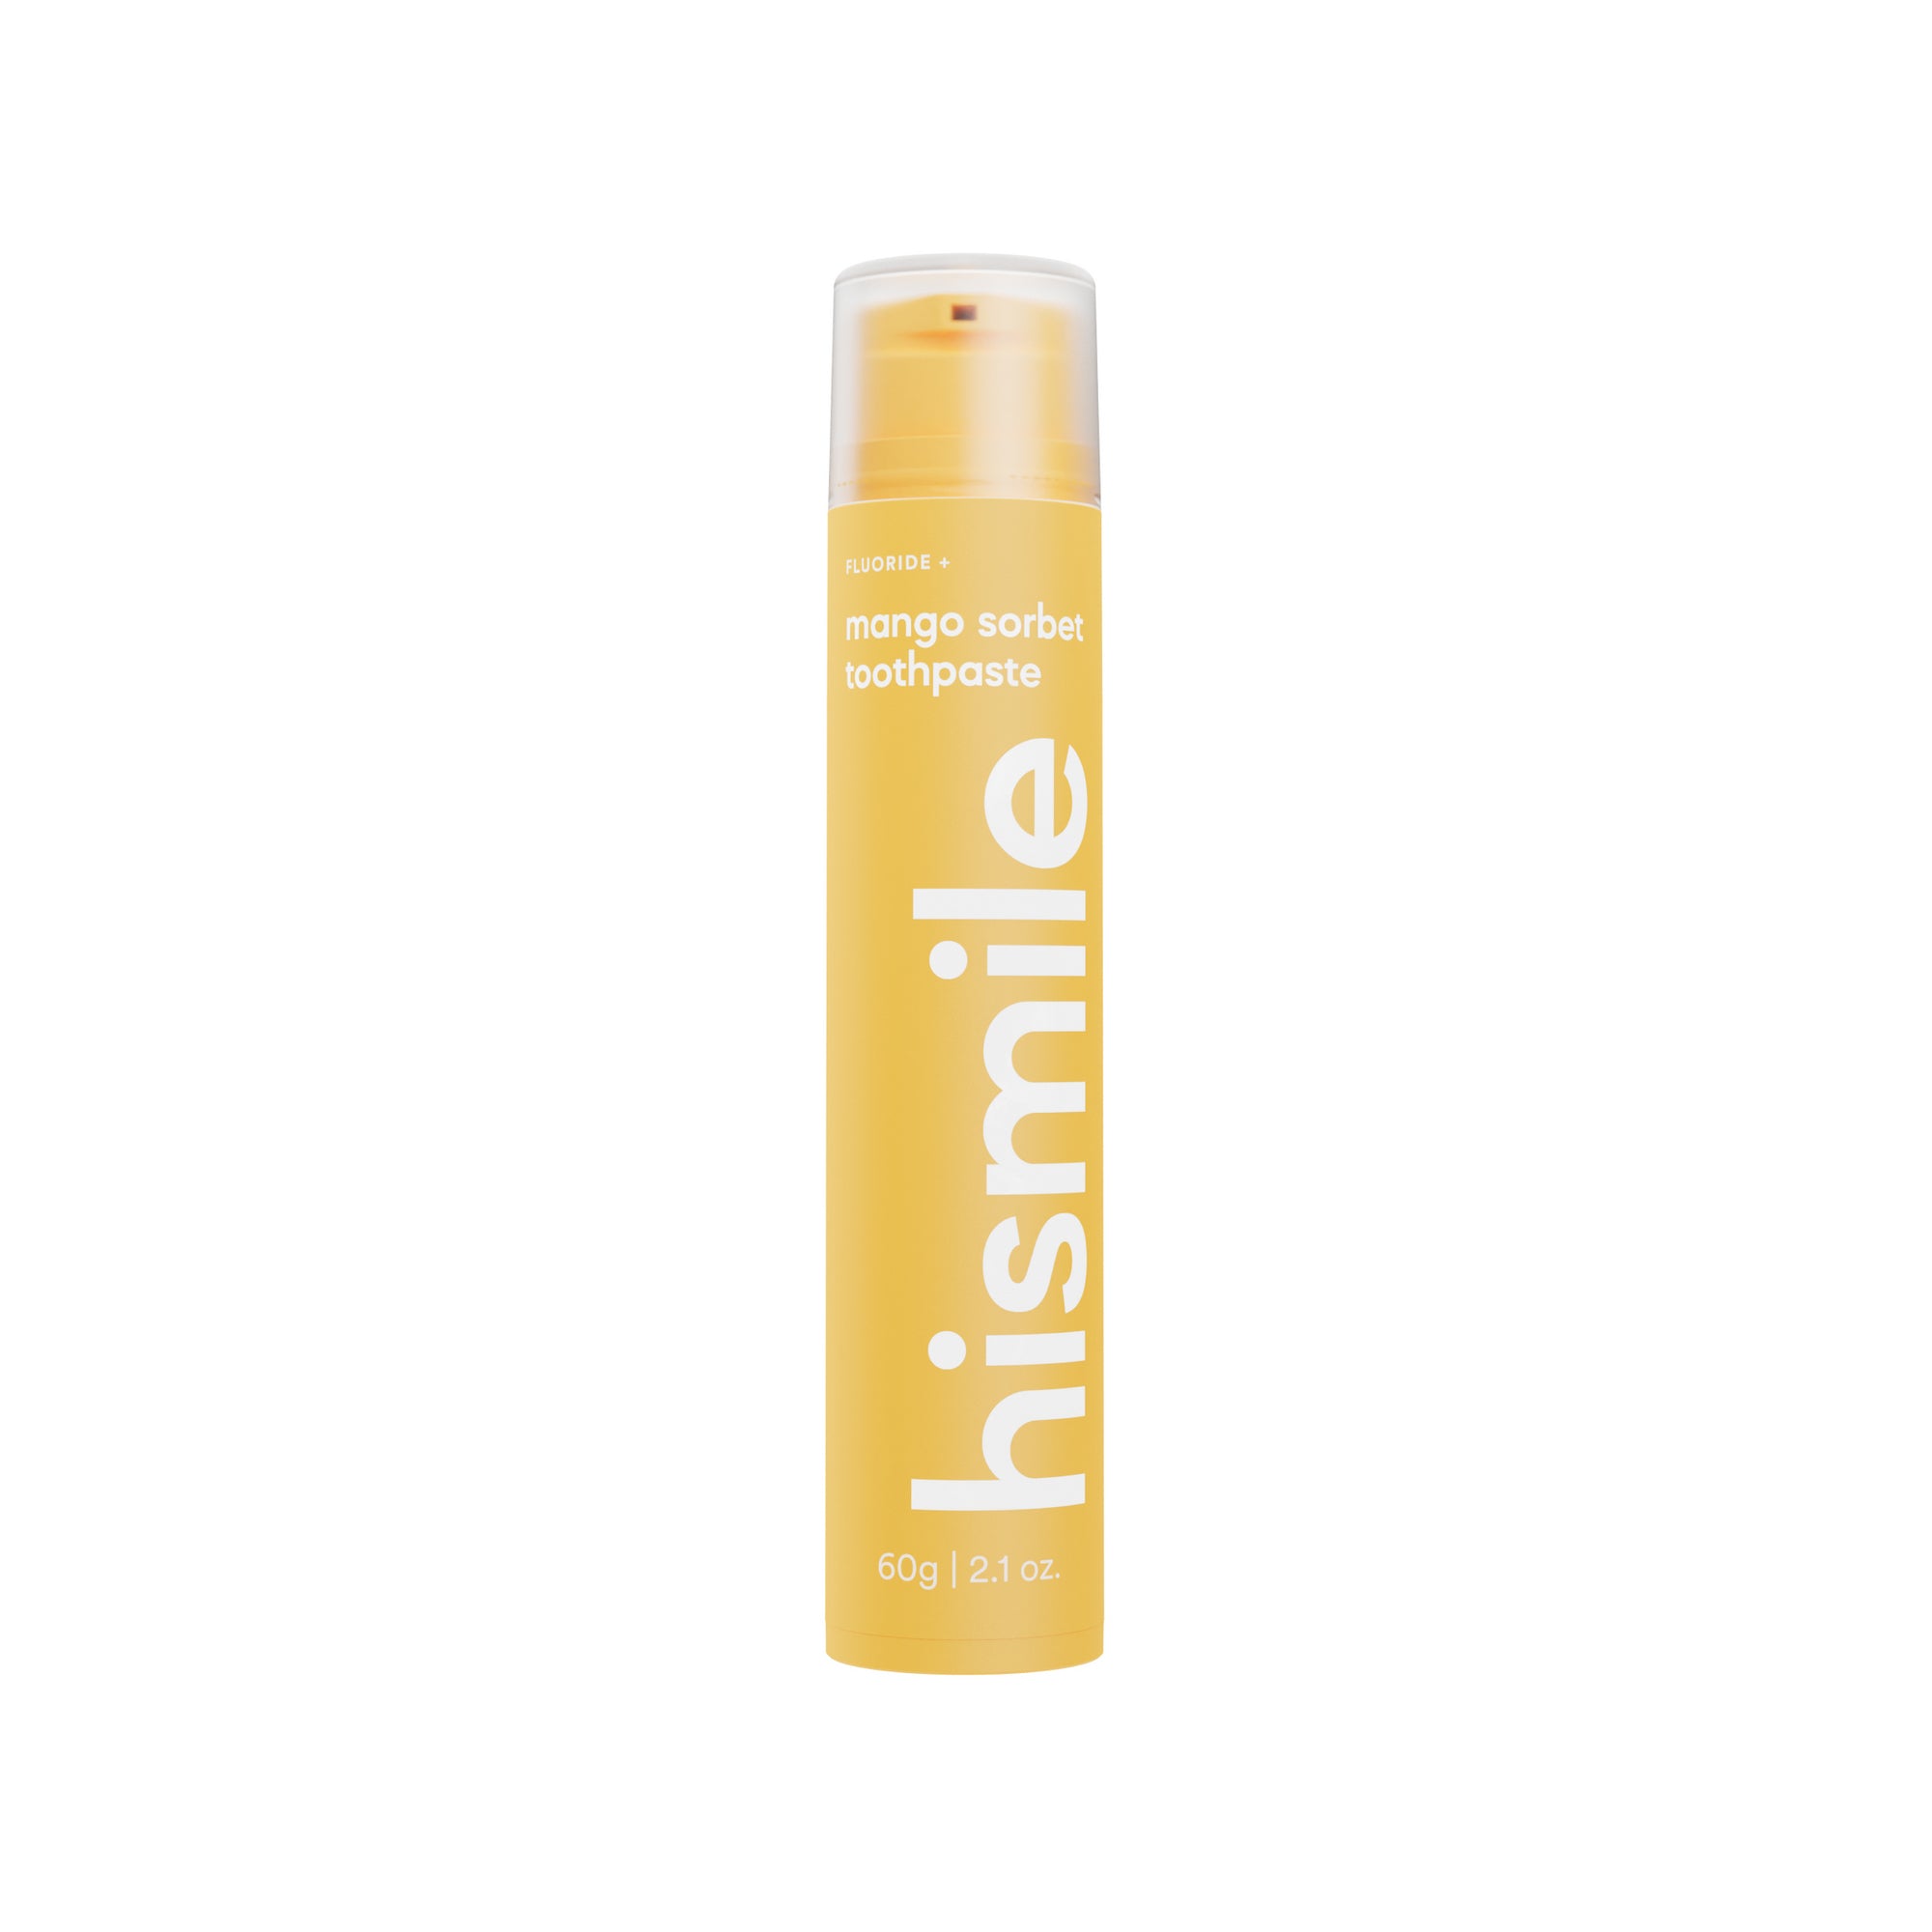 Hismile Mango Sorbet Toothpaste 60g With Cap on